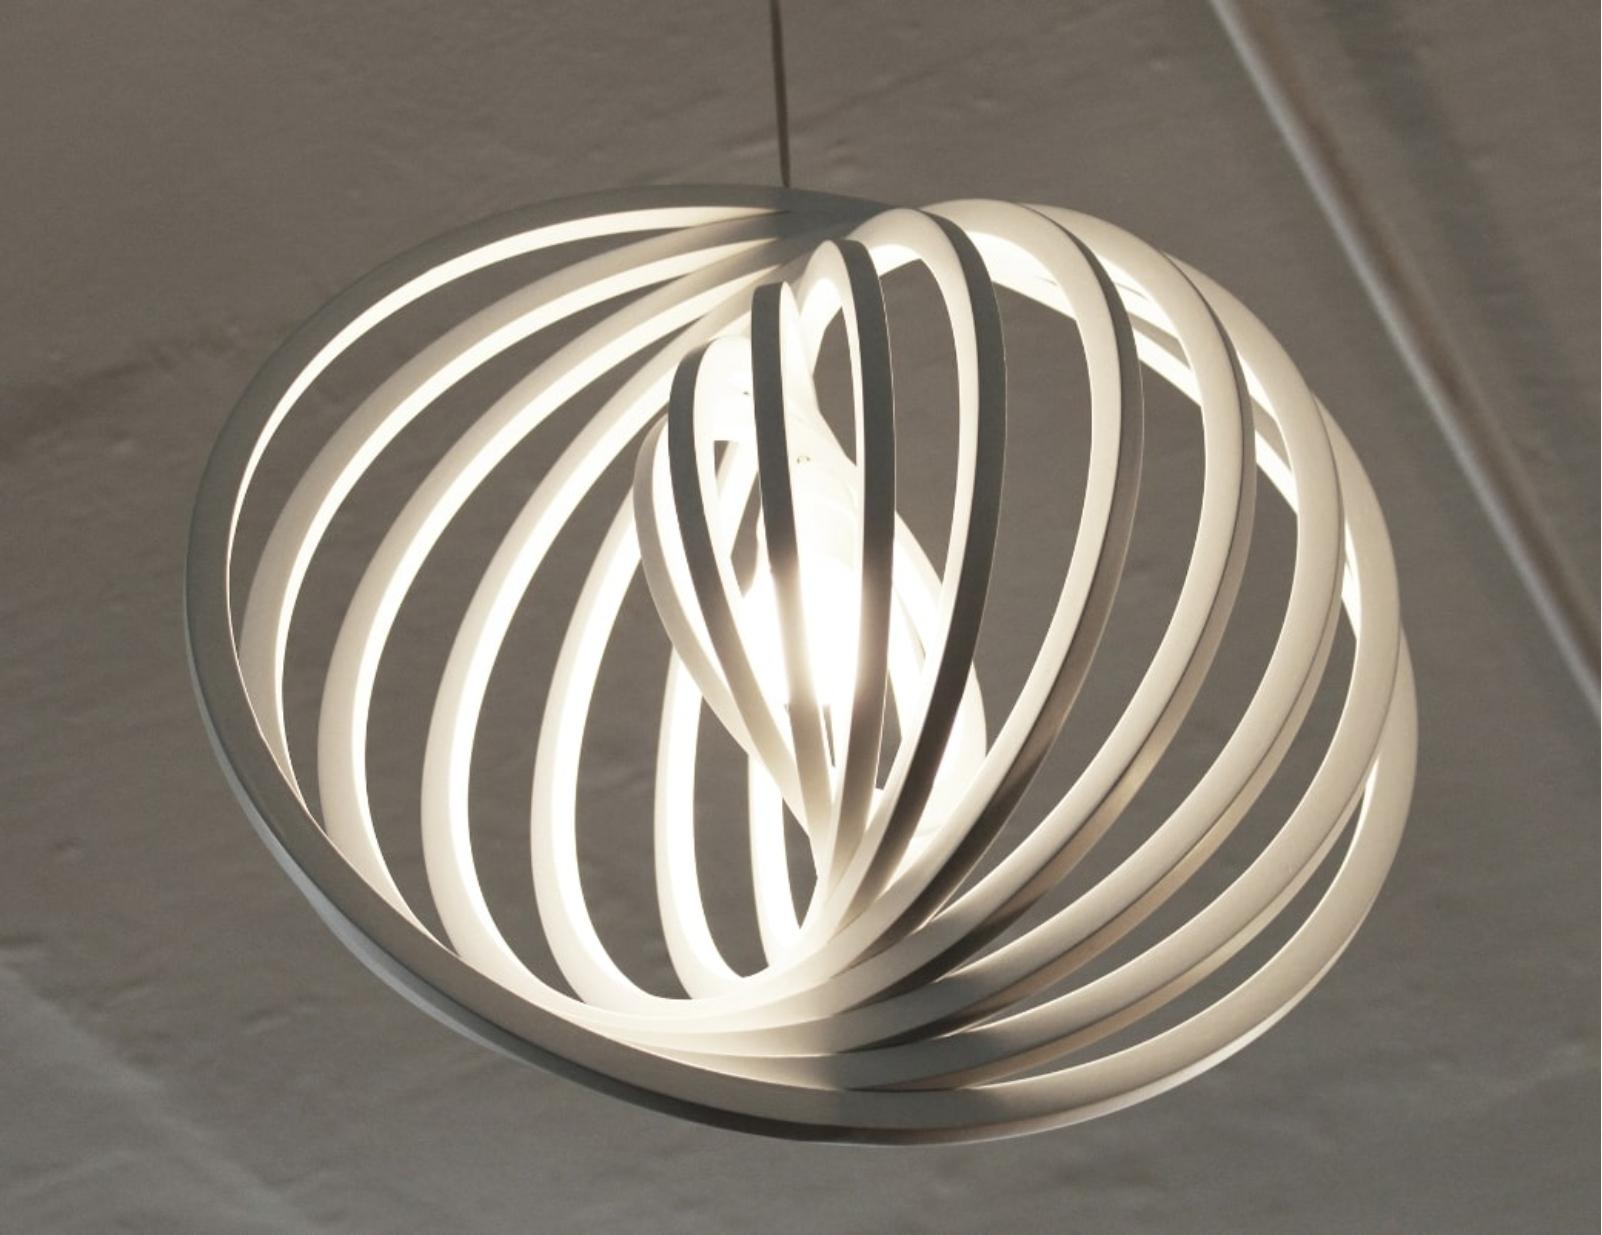 Engiro Ceiling Light, Maria Beckmann, Represented by Tuleste Factory 2